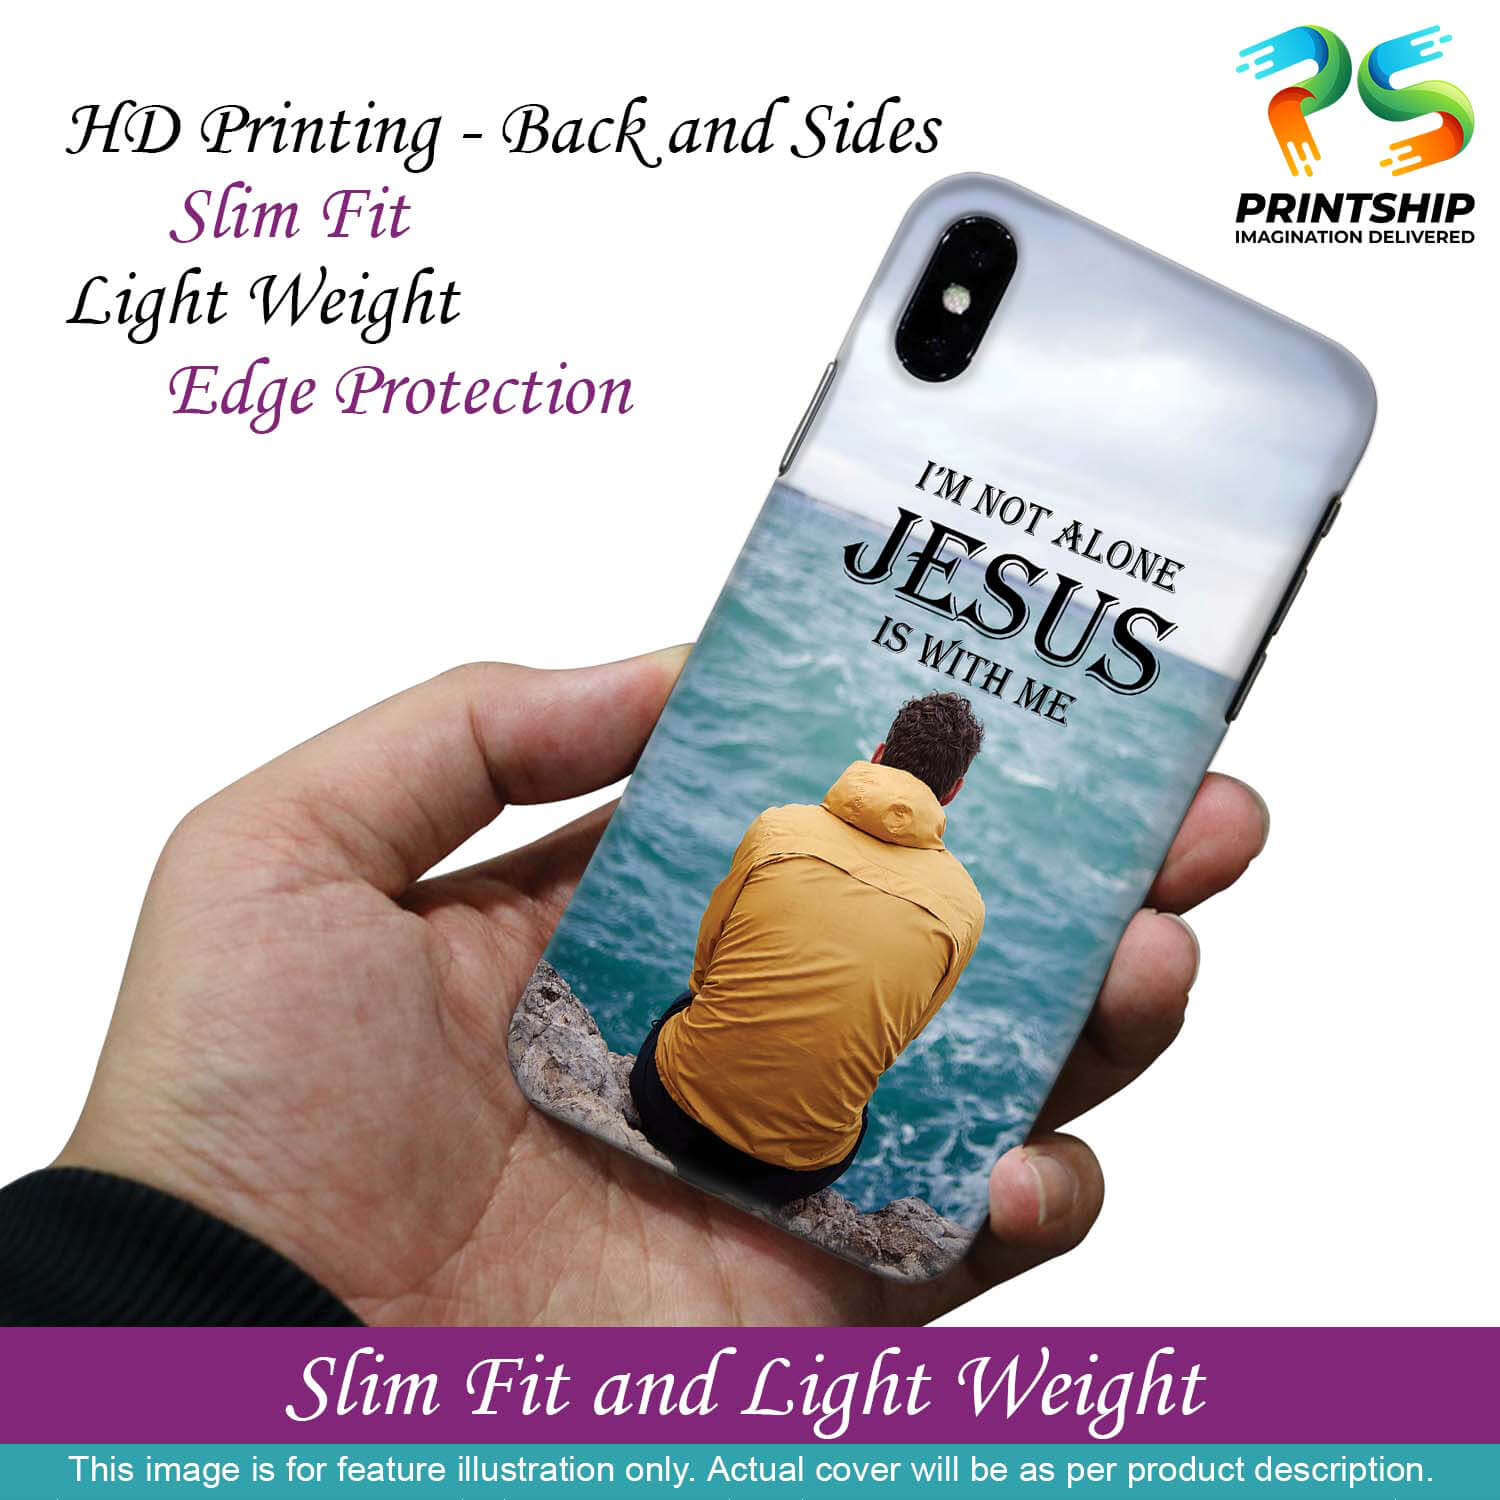 W0007-Jesus is with Me Back Cover for Samsung Galaxy A13